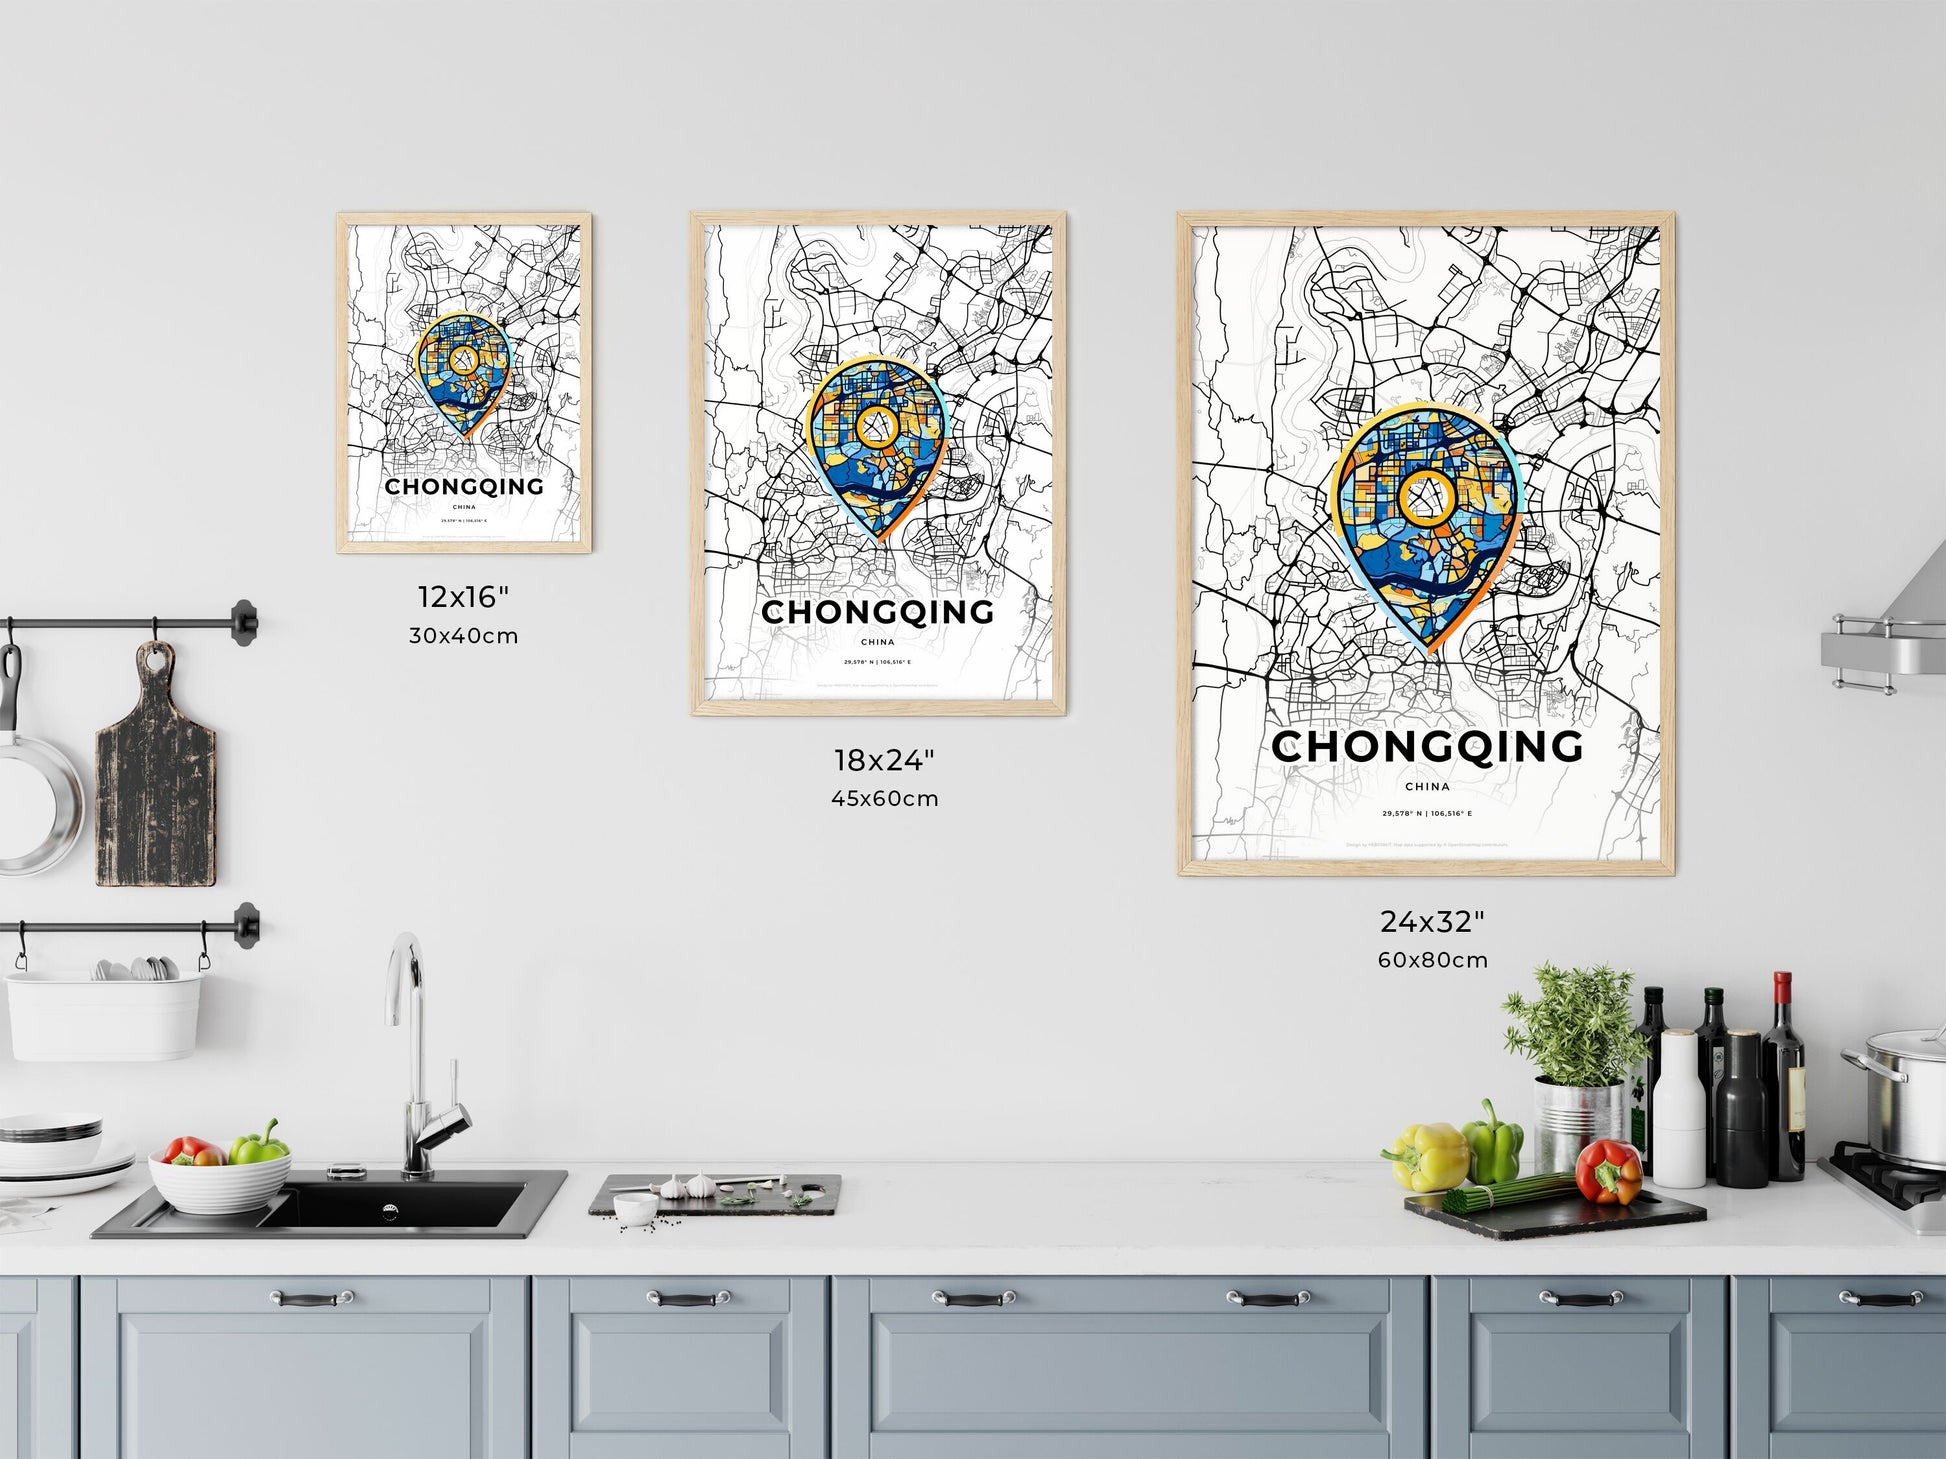 CHONGQING CHINA minimal art map with a colorful icon. Where it all began, Couple map gift.